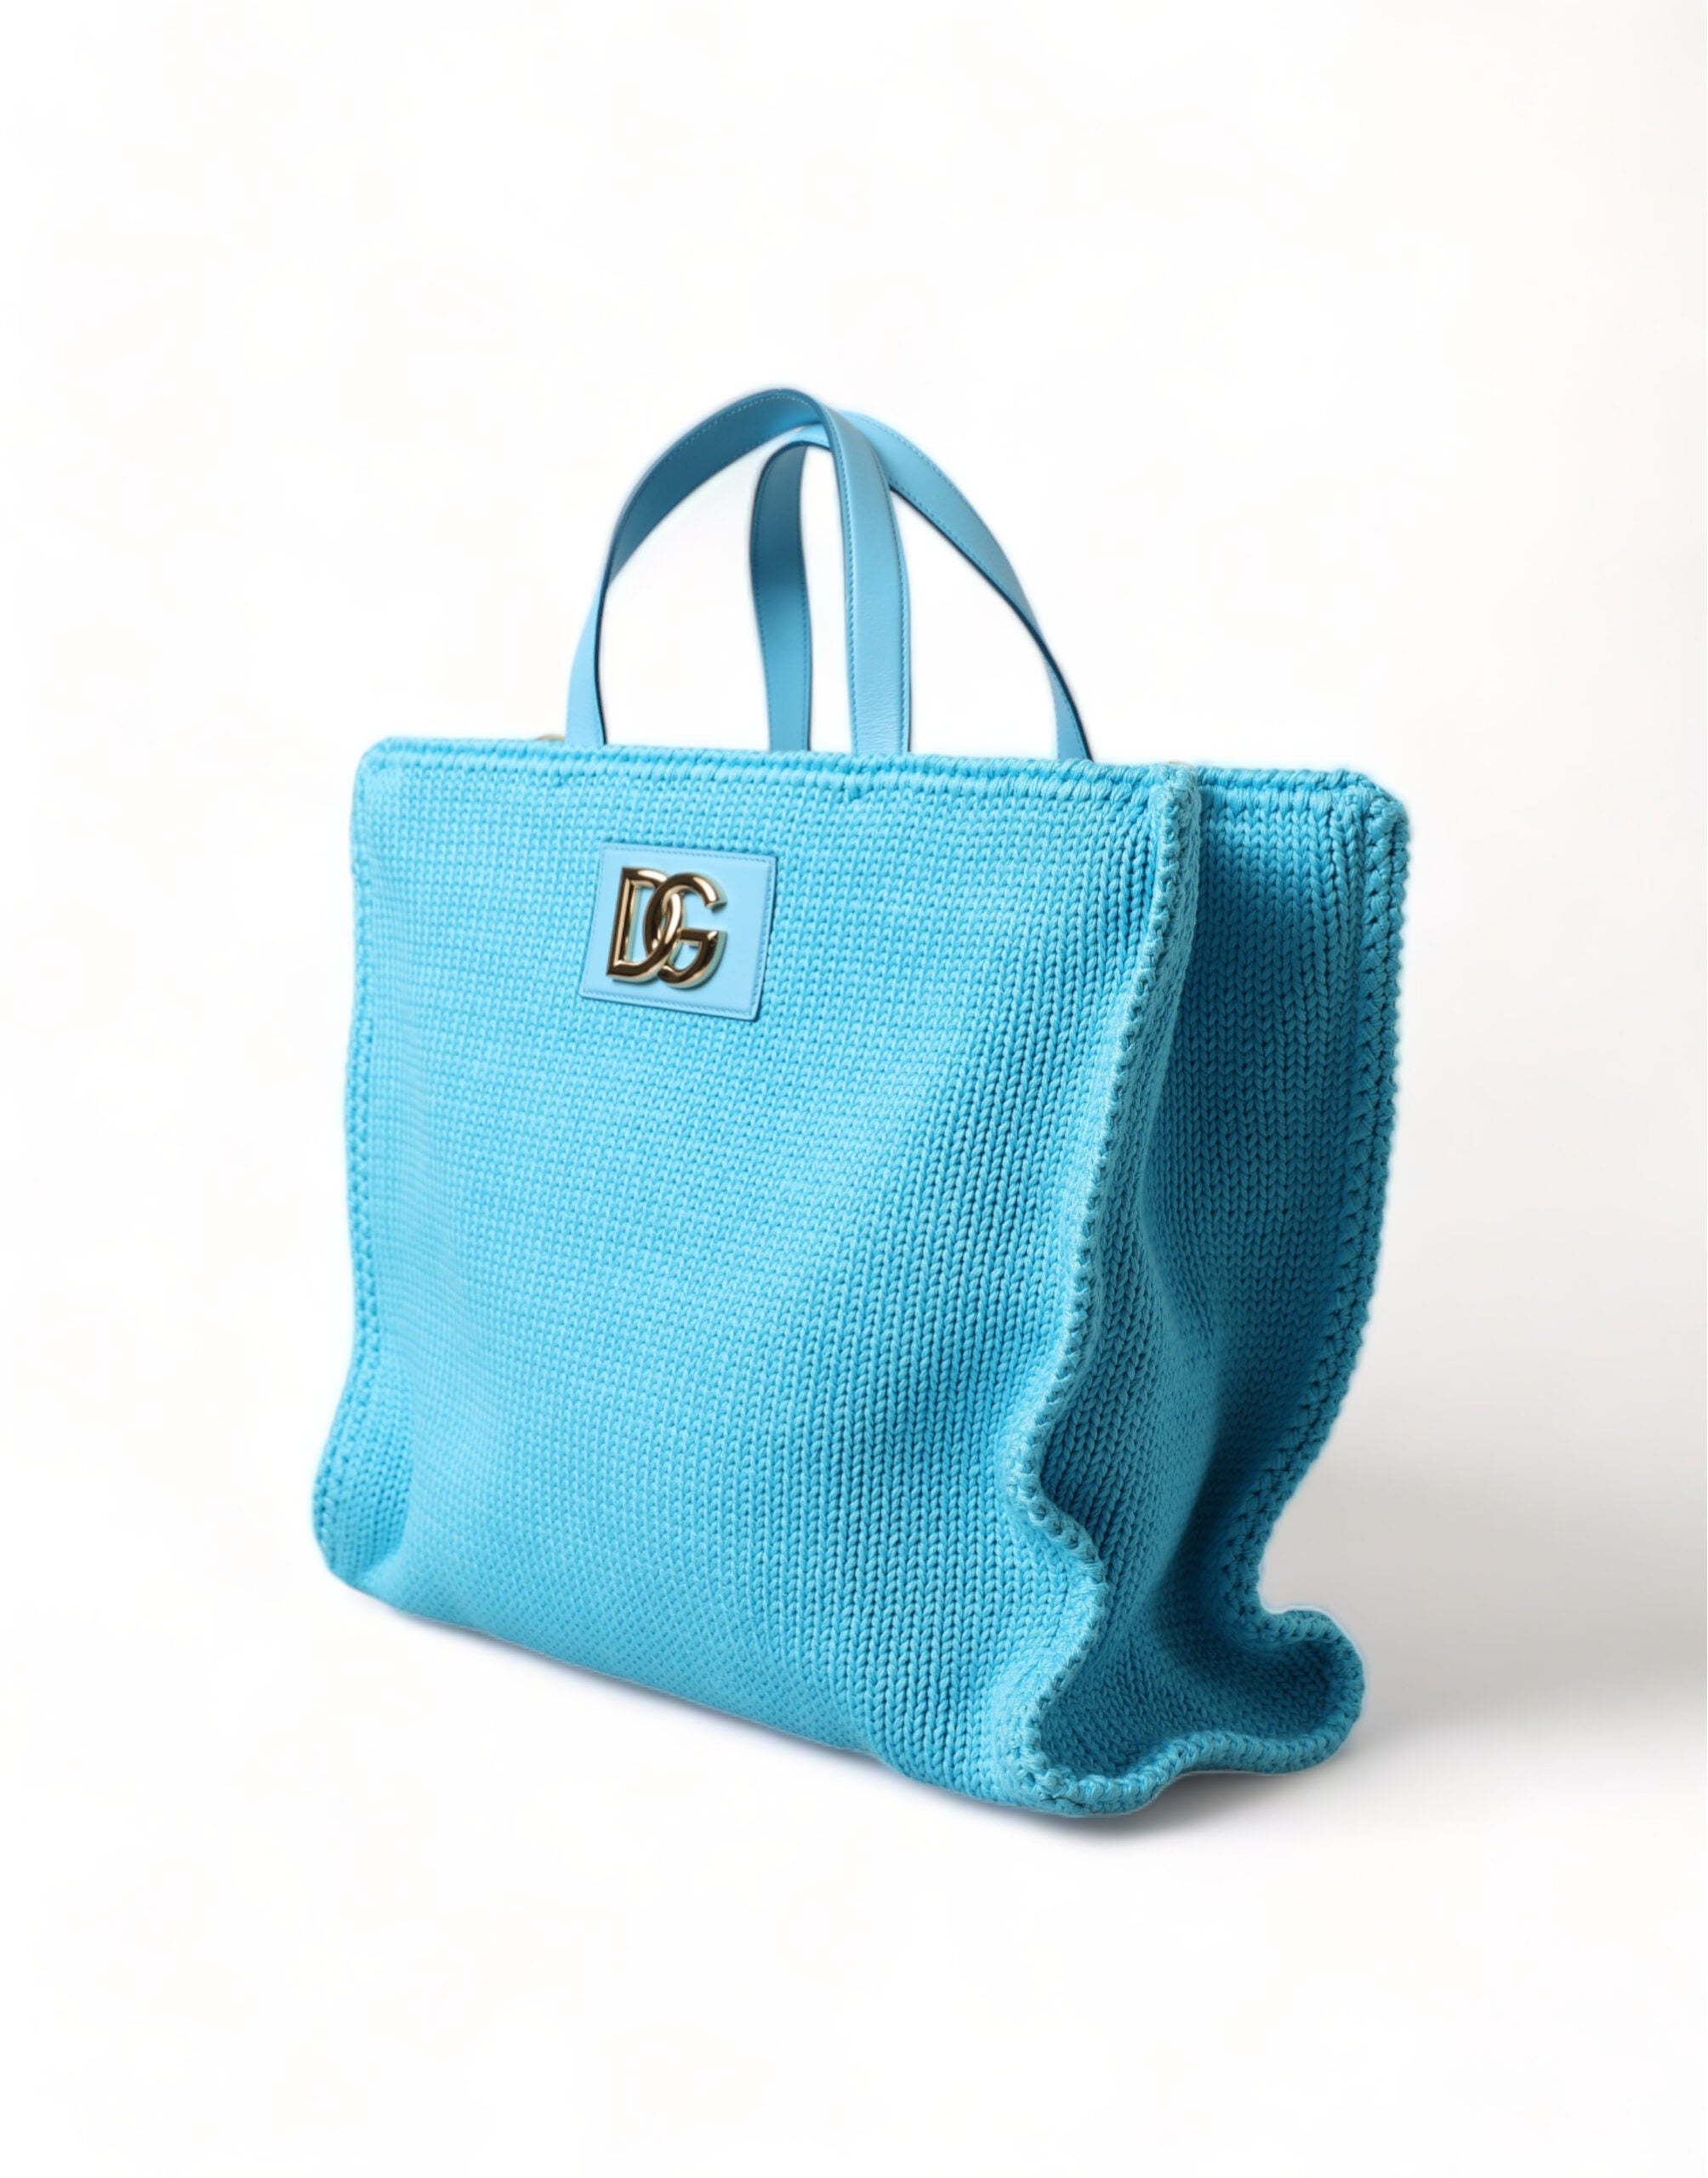 Dolce & Gabbana Elegant Turquoise Gold-Accent Tote Bag